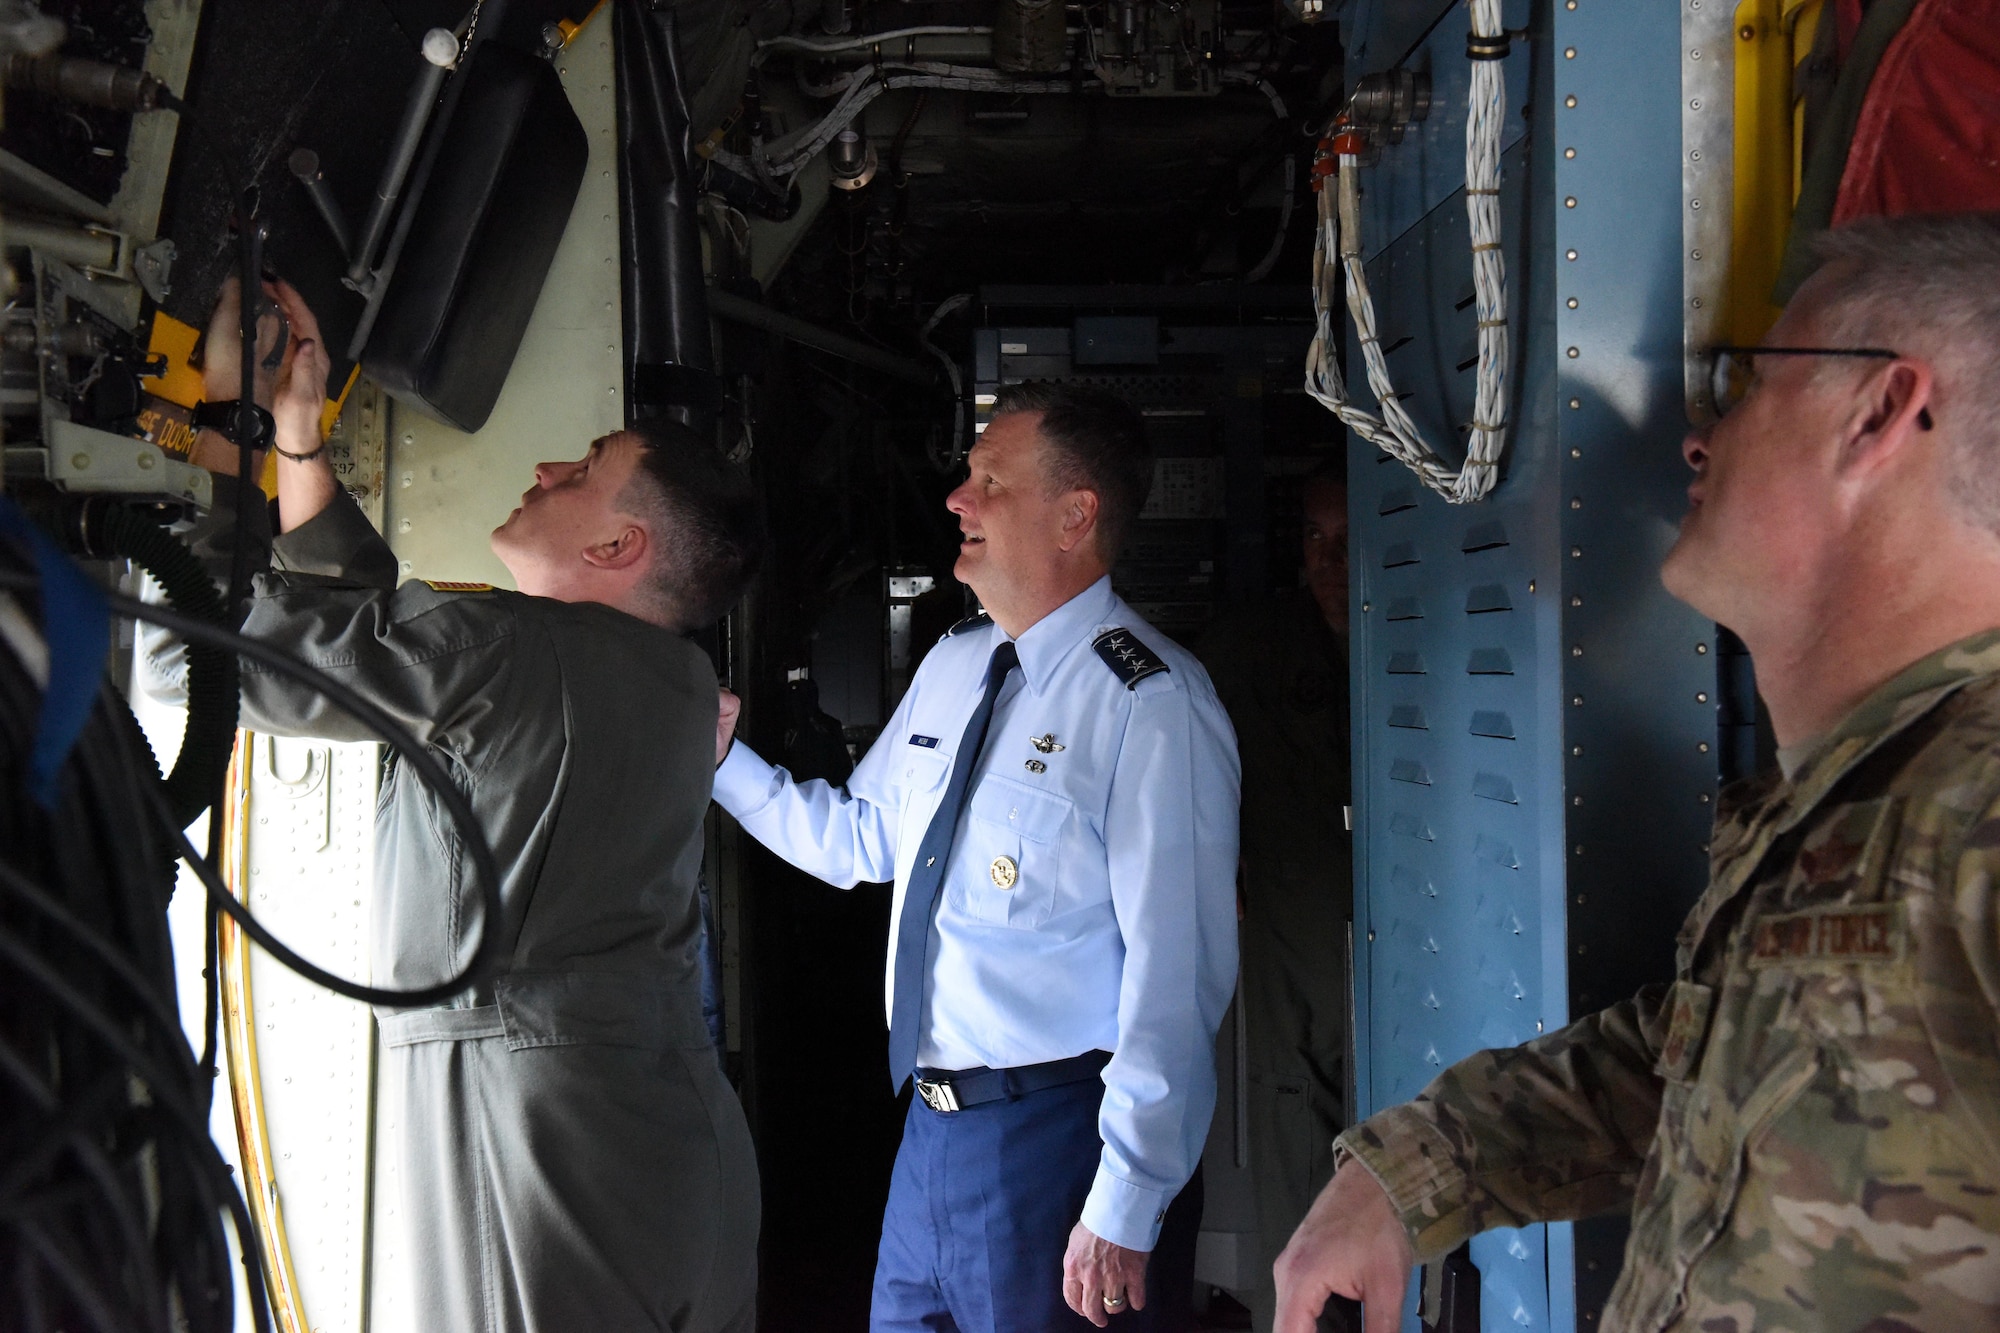 U.S. Air Force Lt. Gen. Brad Webb (center), commander of Air Force Special Operations Command, and Chief Master Sgt. Gregory Smith, command chief master sergeant of Air Force Special Operations Command, listen to Master Sgt. Stanley Hain, 193rd Special Operations Wing loadmaster, brief on ground egress aboard an EC-130J Solo aircraft at Middletown, Pennsylvania, June 9, 2017. Webb flew the solo to the 193rd Air Operations Group at State College, Pennsylvania, the following day. (U.S. Air National Guard photo by Master Sgt. Culeen Shaffer/Released)